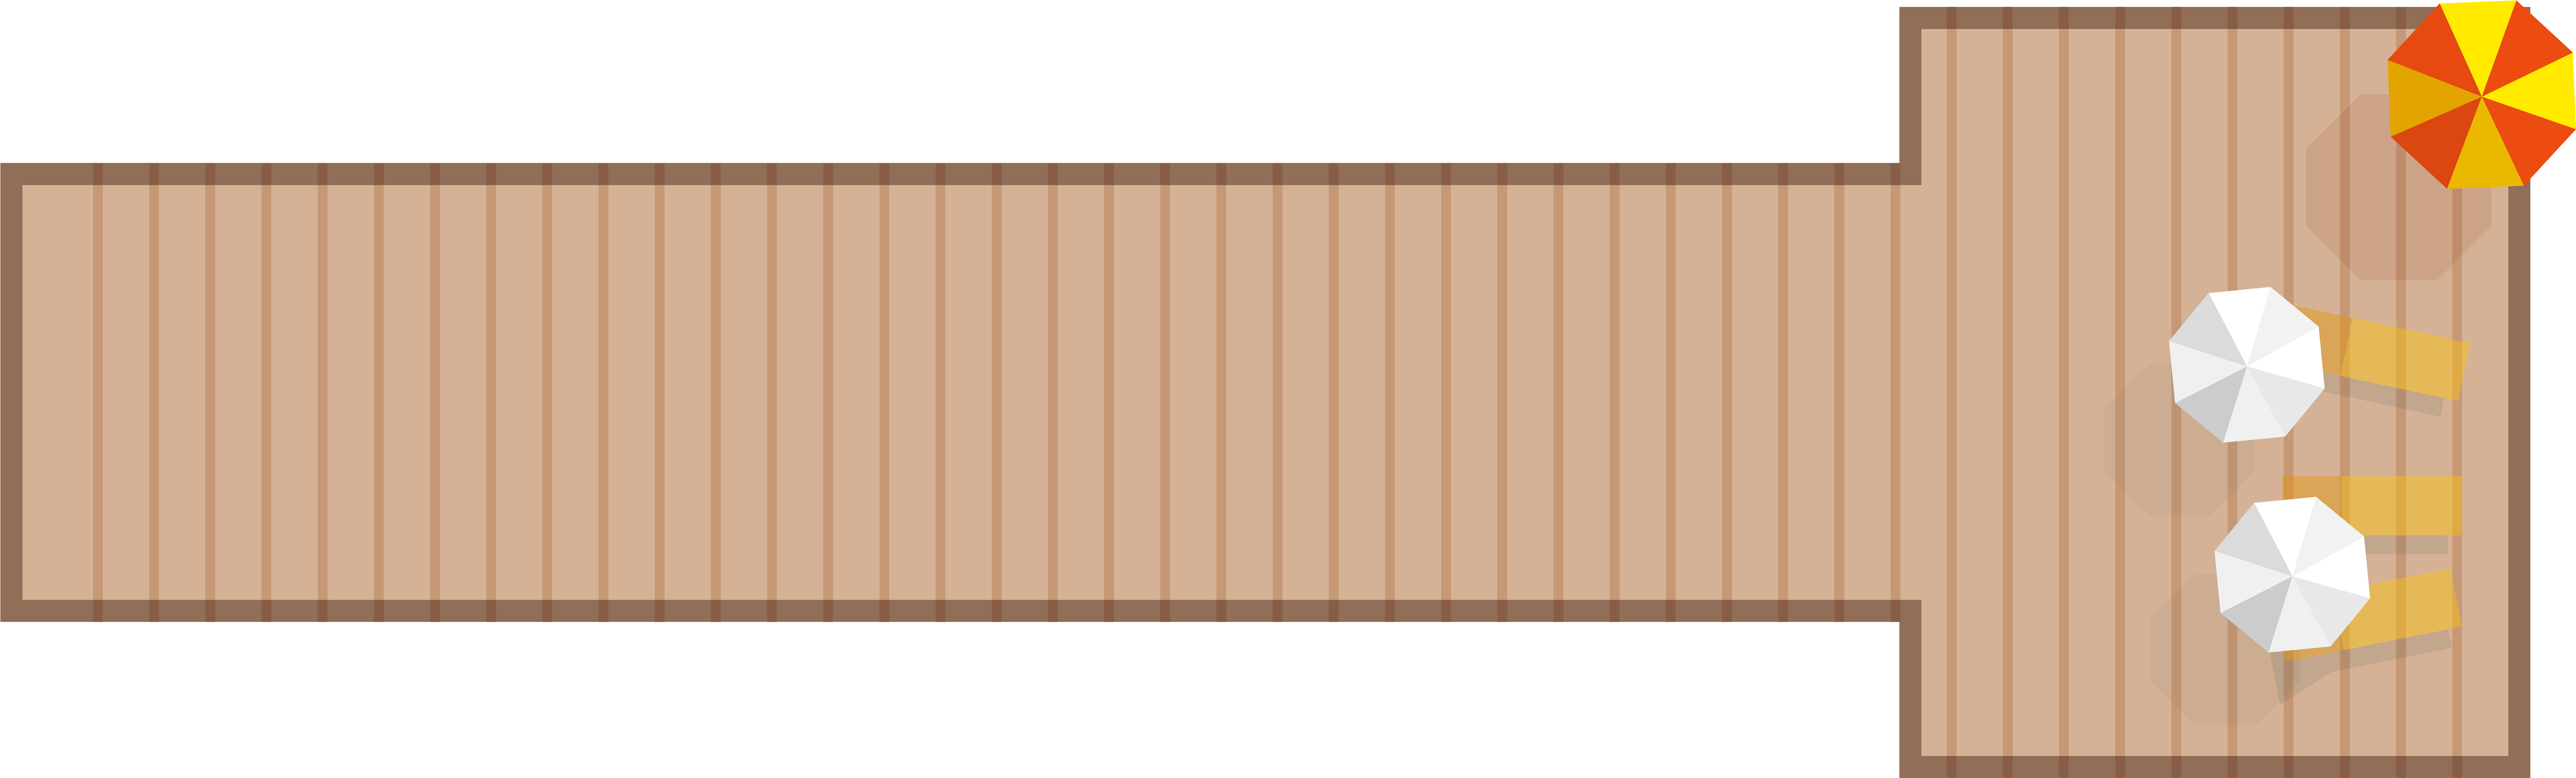 Wooden Dock Top View Illustration PNG